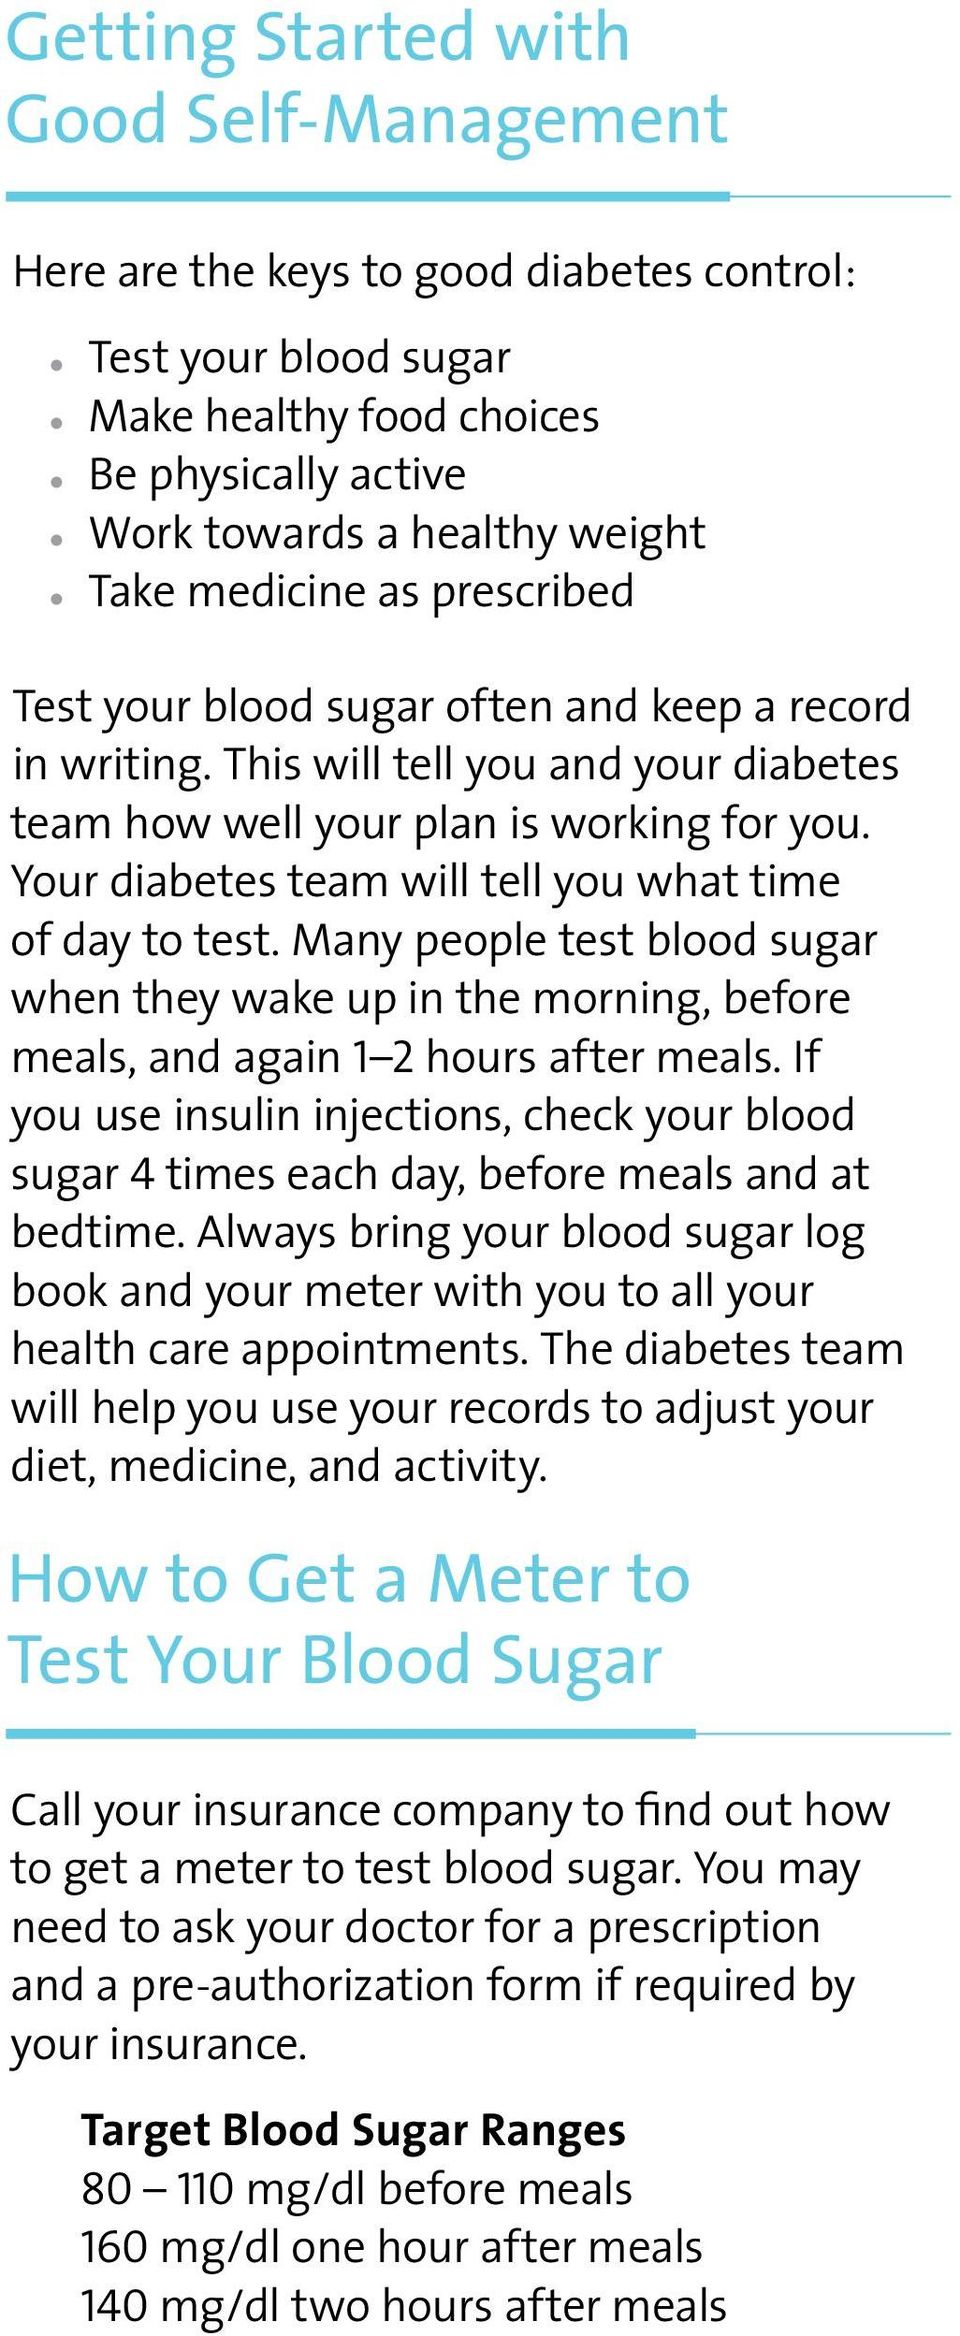 Your diabetes team will tell you what time of day to test. Many people test blood sugar when they wake up in the morning, before meals, and again 1 2 hours after meals.